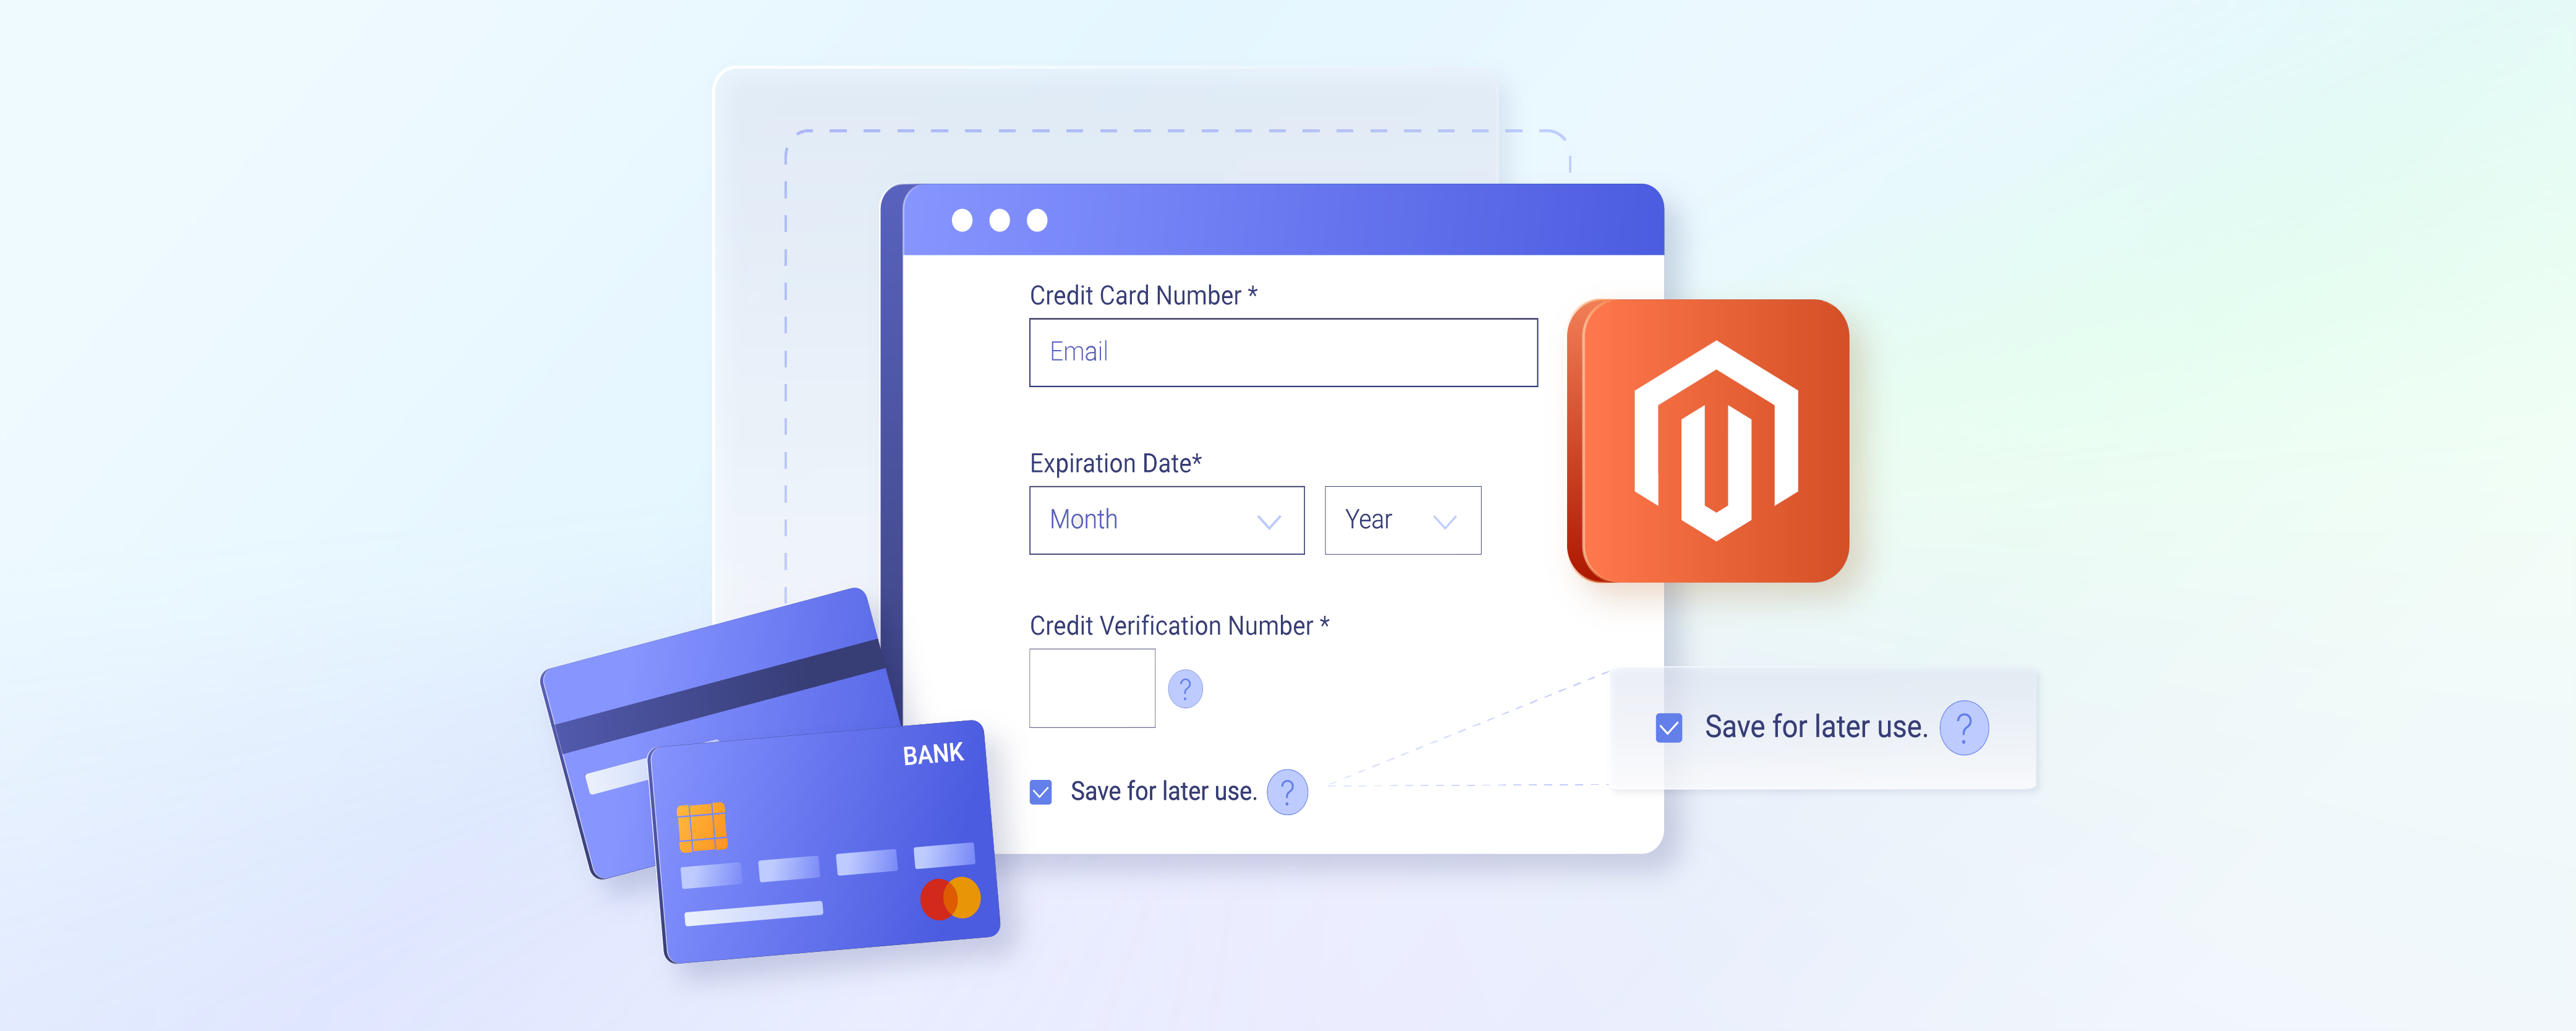 Magento Credit Card Processing with Vaulting